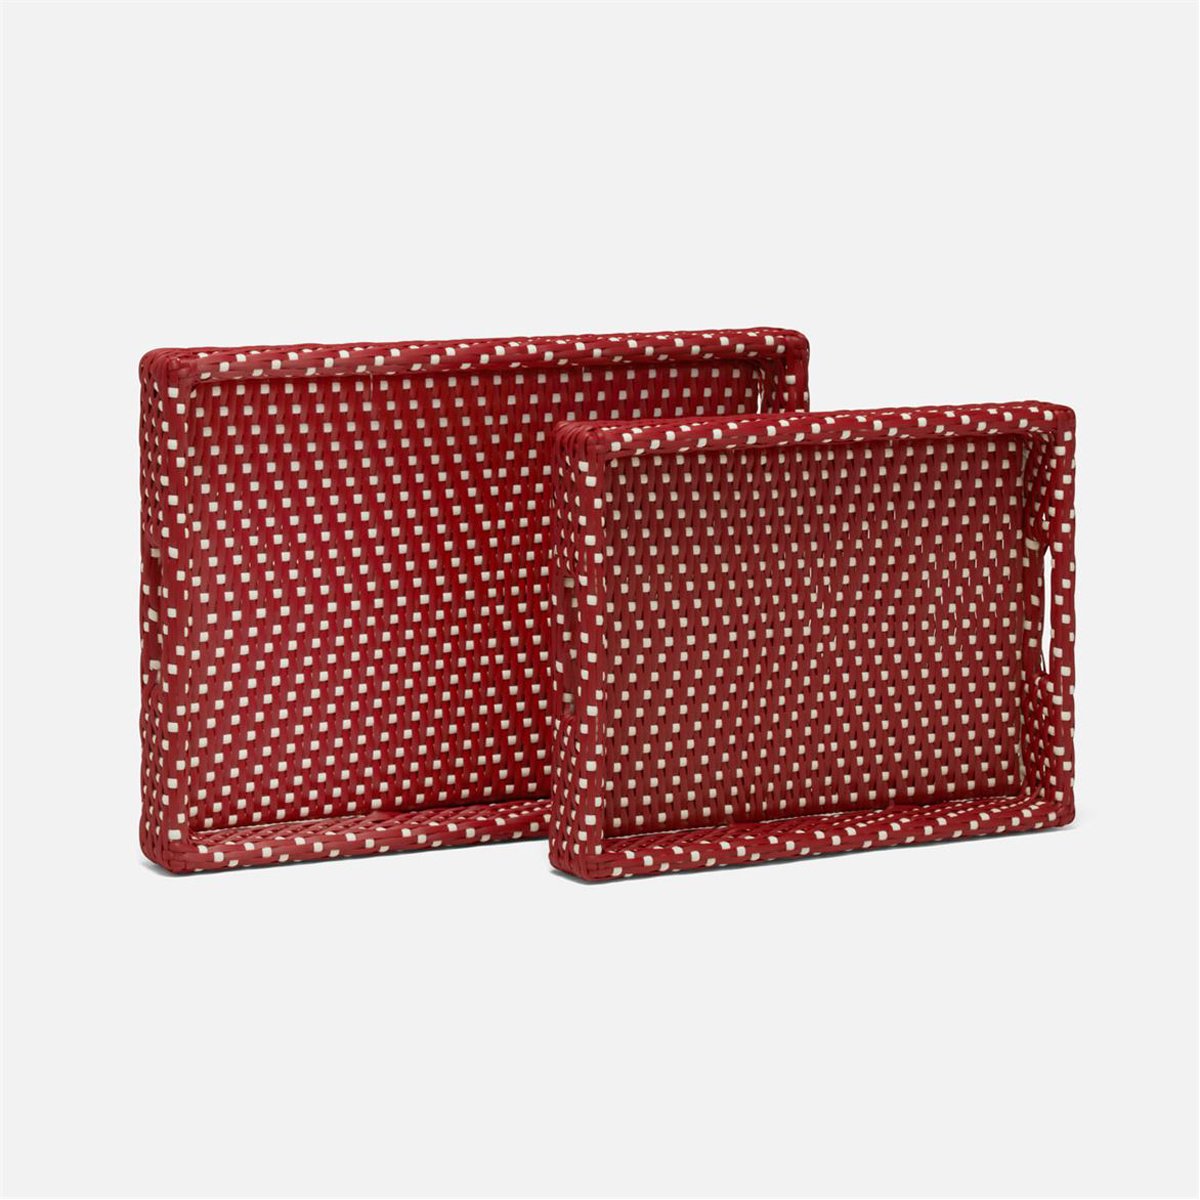 Made Goods Avanna High-Contrast Faux Wicker Outdoor Tray, 2-Piece Set